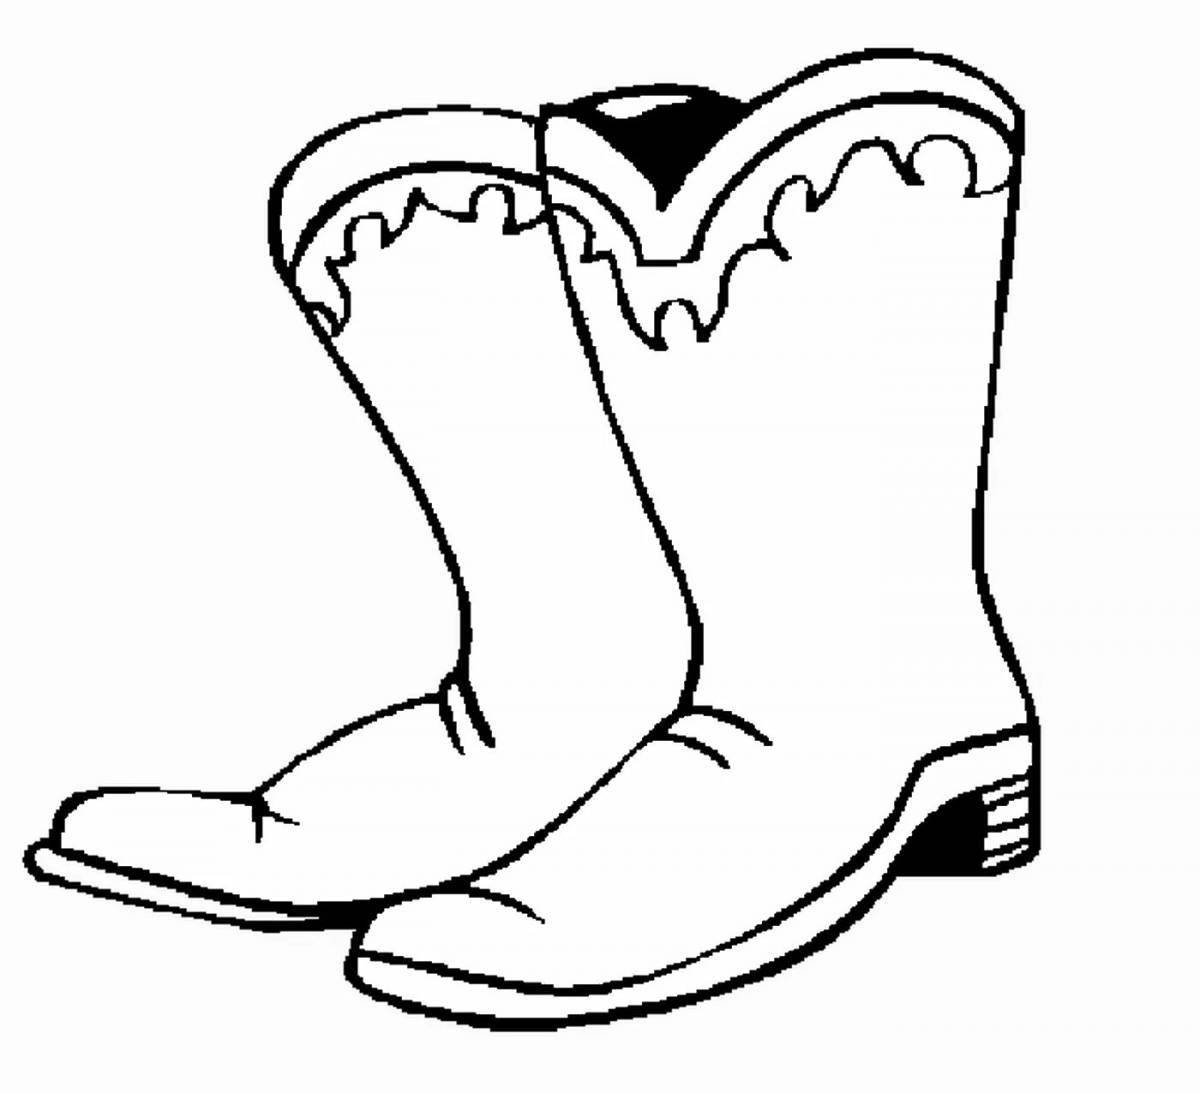 Colorful shoes coloring page for kids